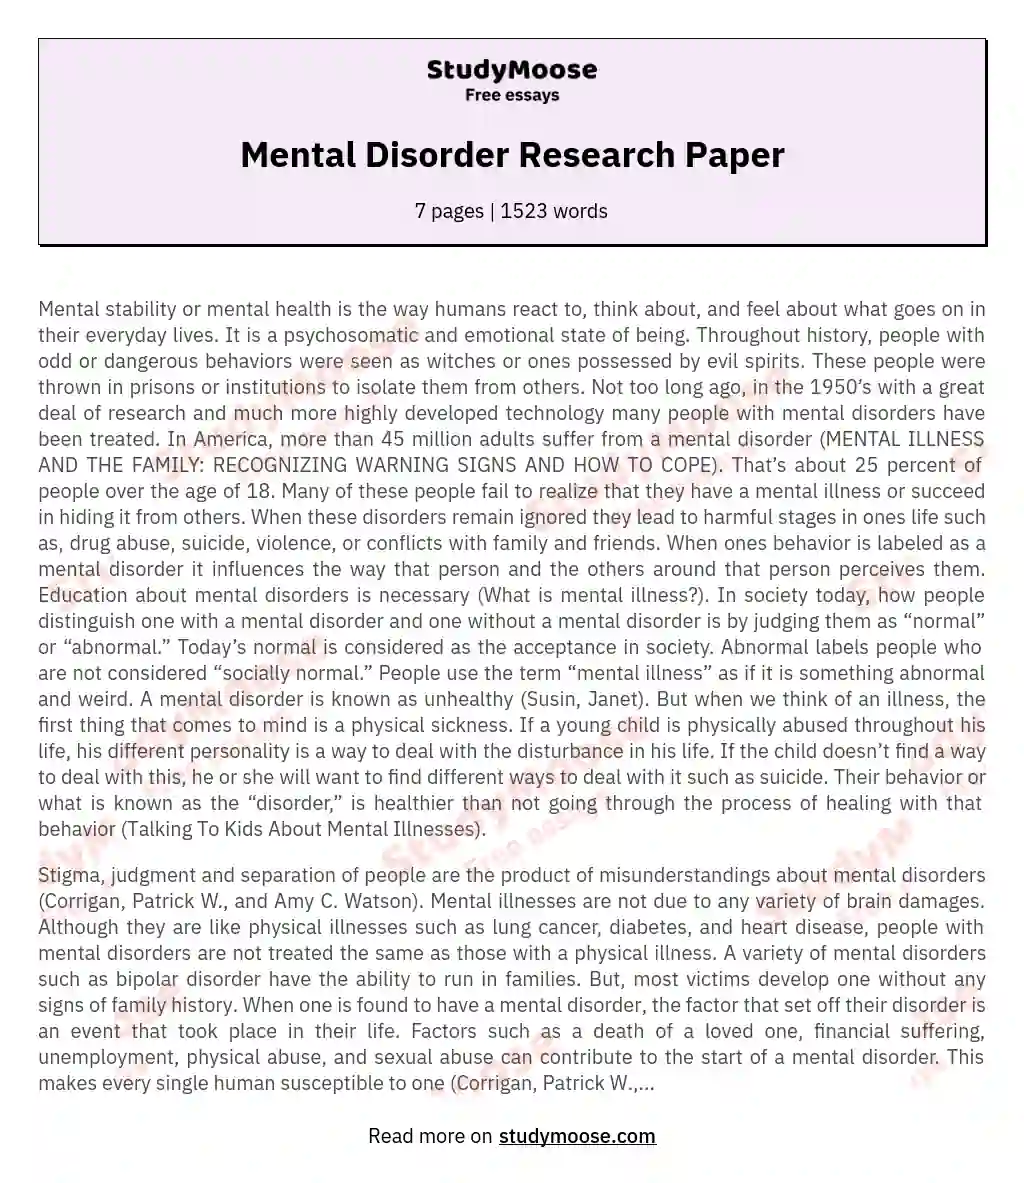 research papers on psychological disorder